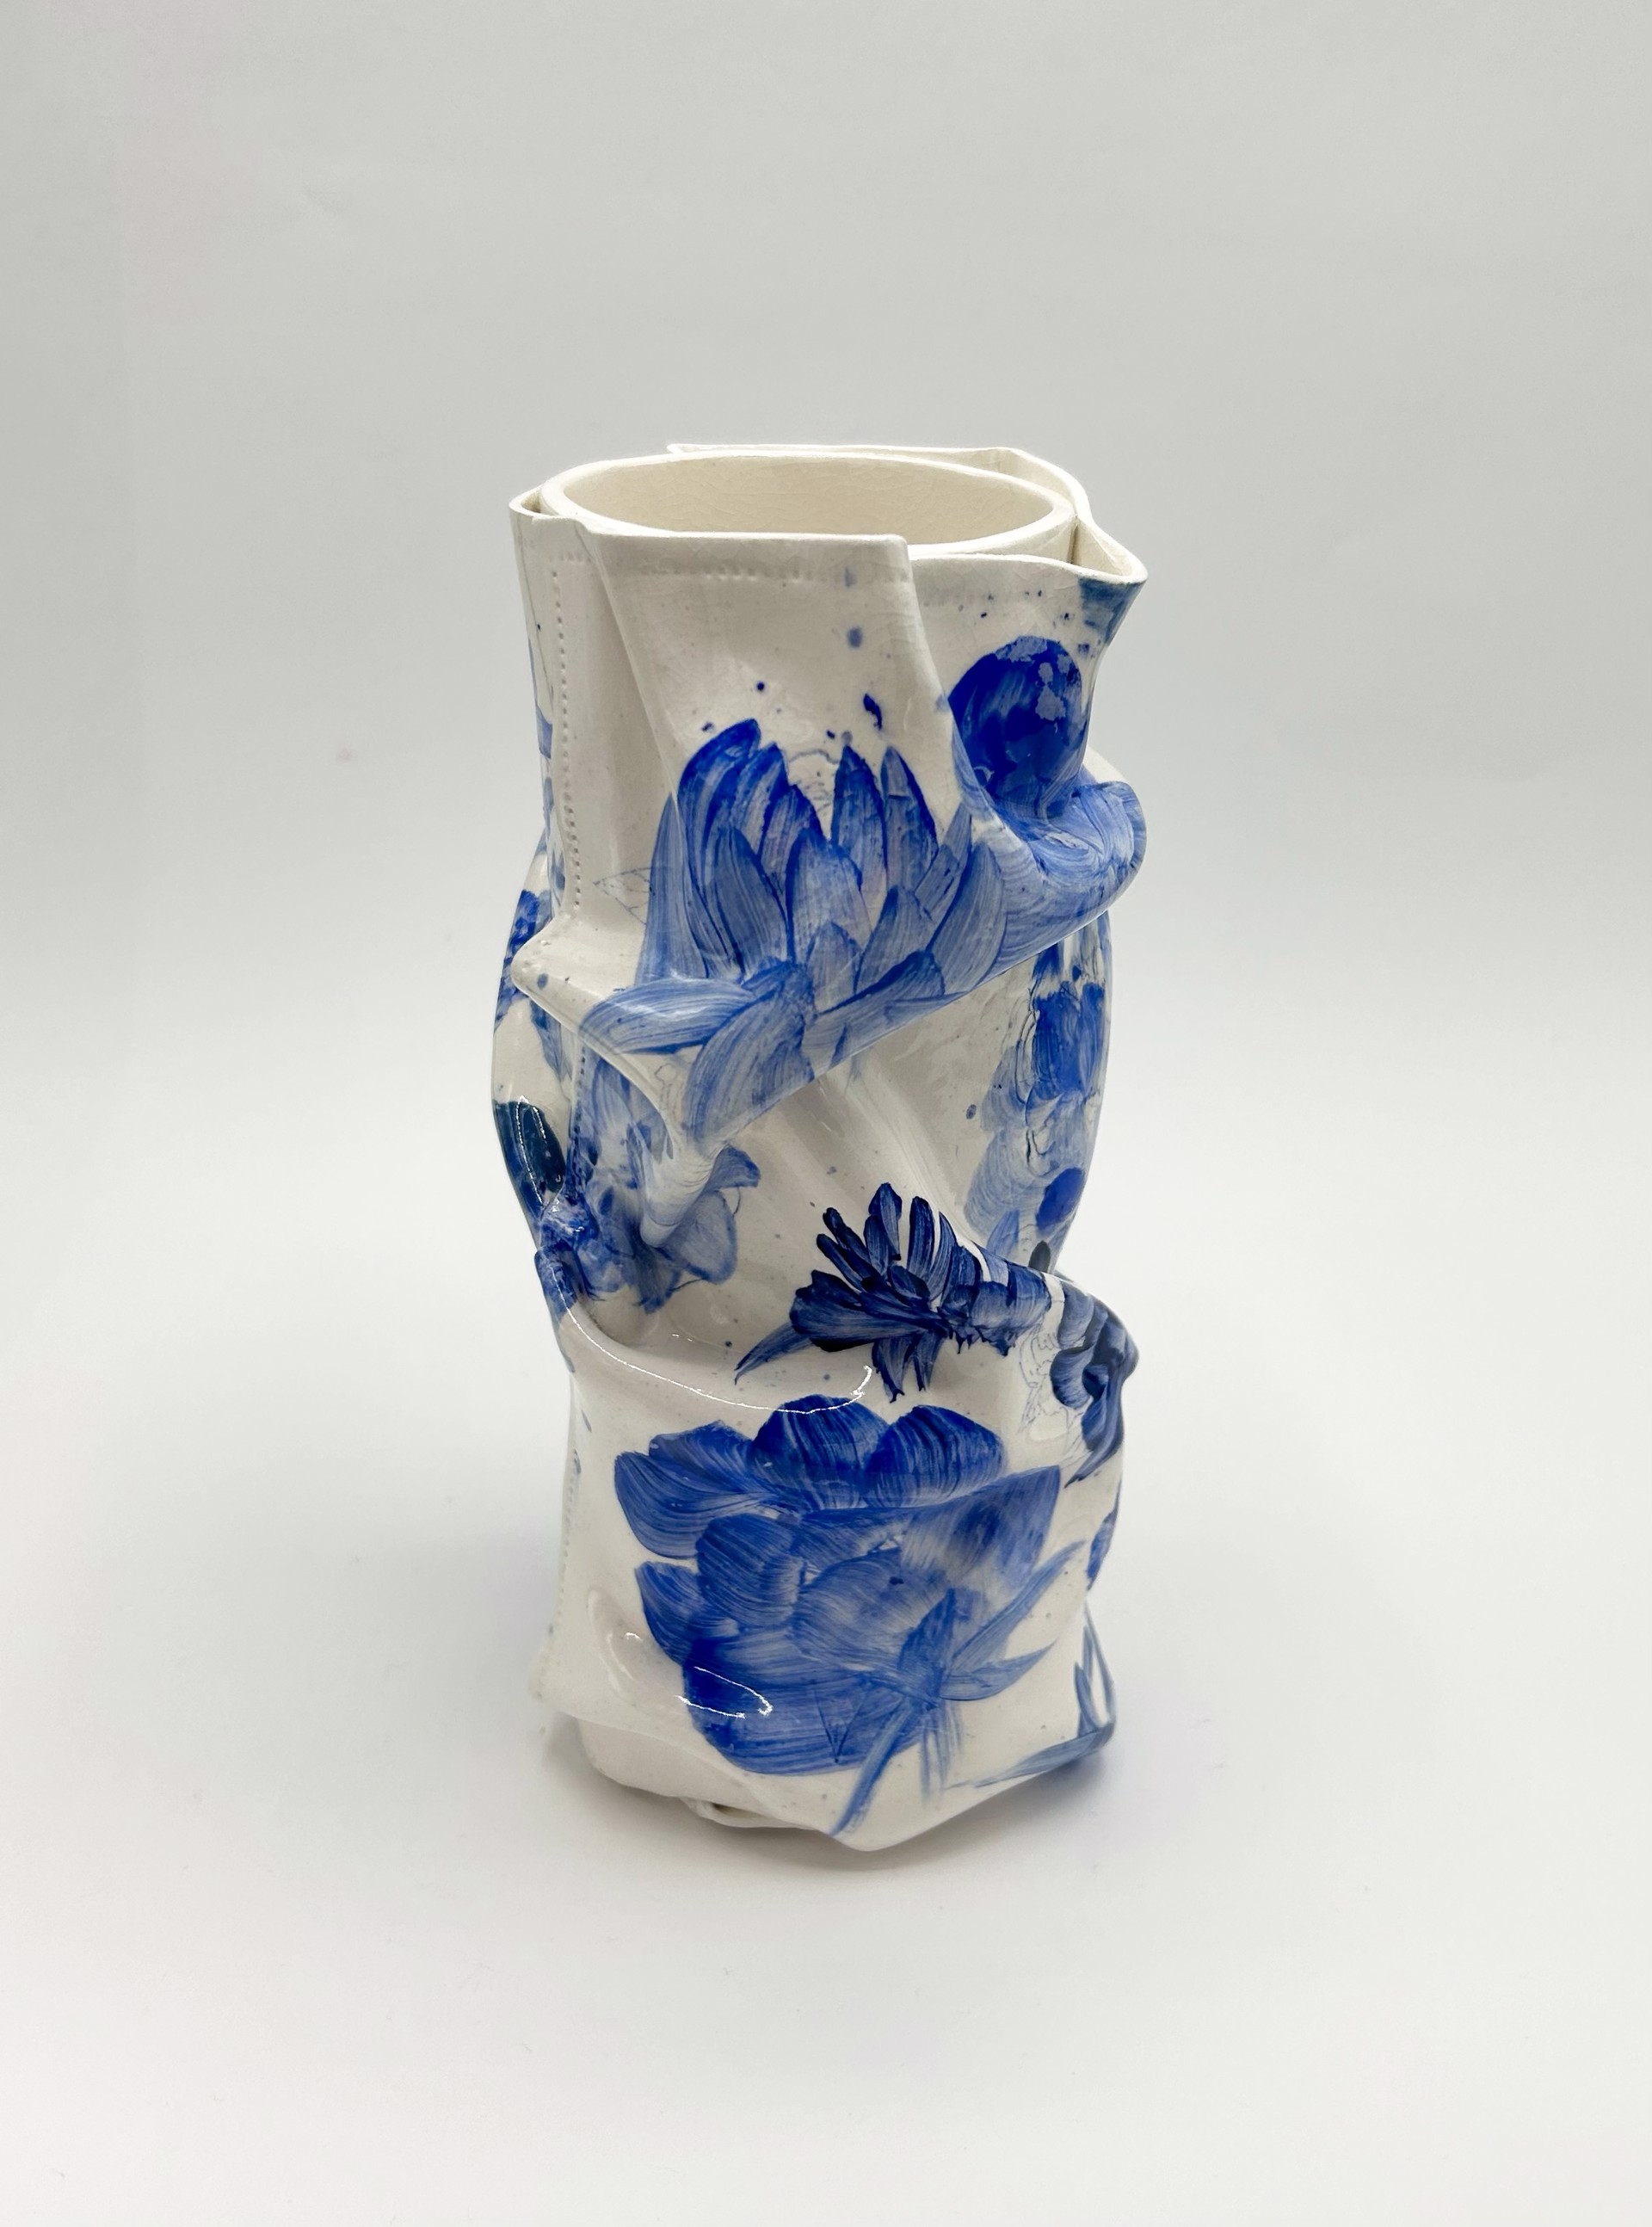 Wrinkled Vase with Blue Flowers by Chandra Beadleston